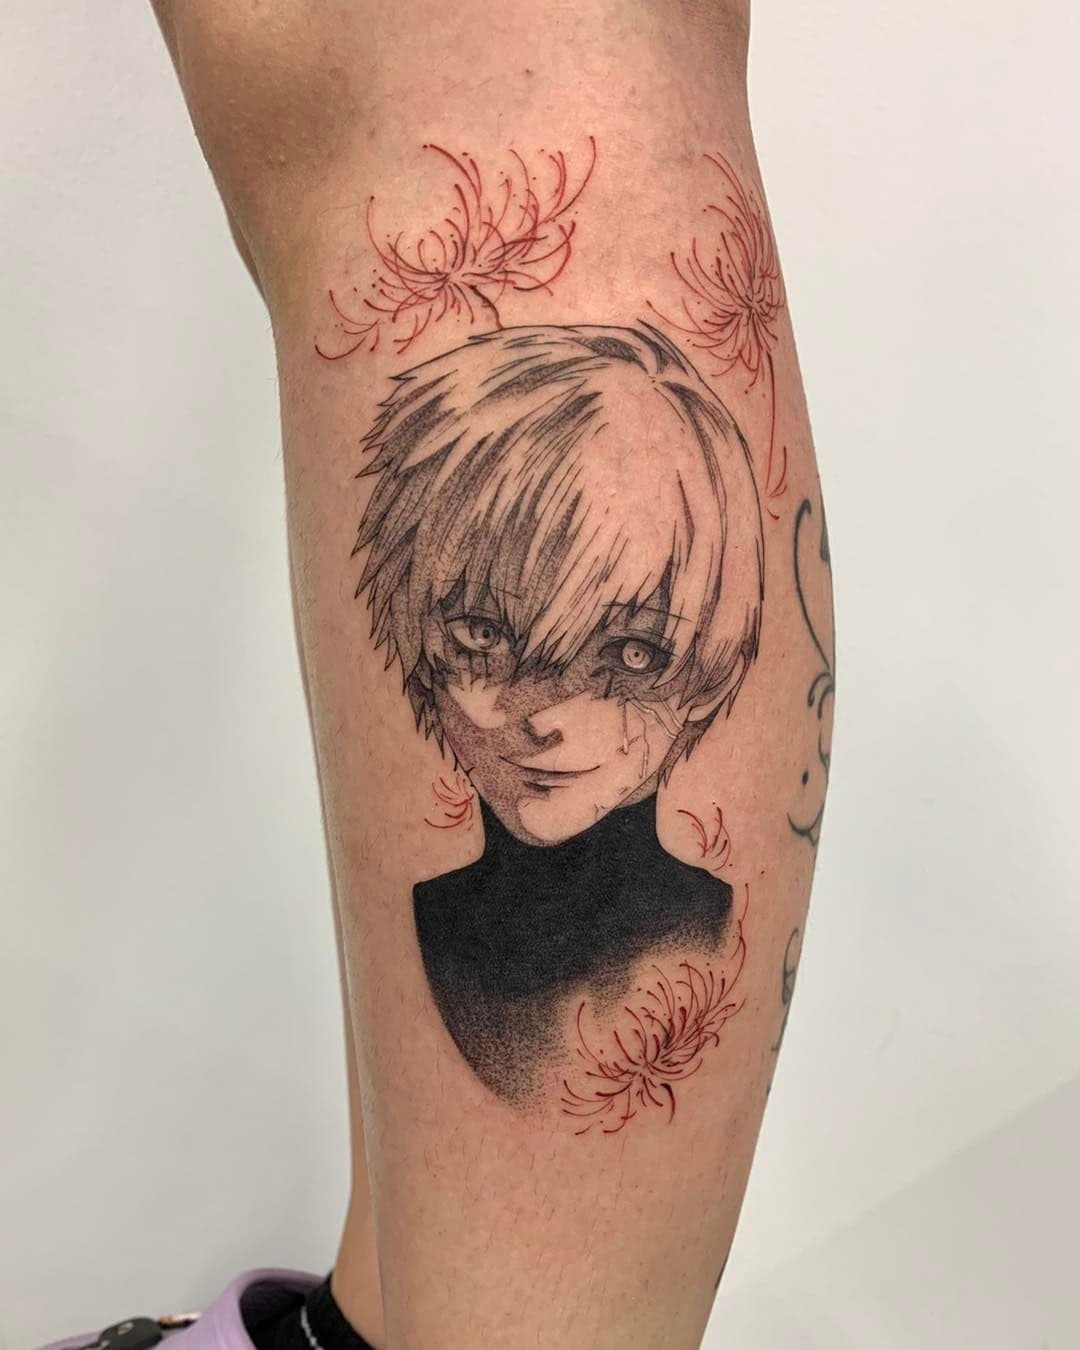 10 Tokyo Ghoul Tattoo Designs You Need To See  Outsons